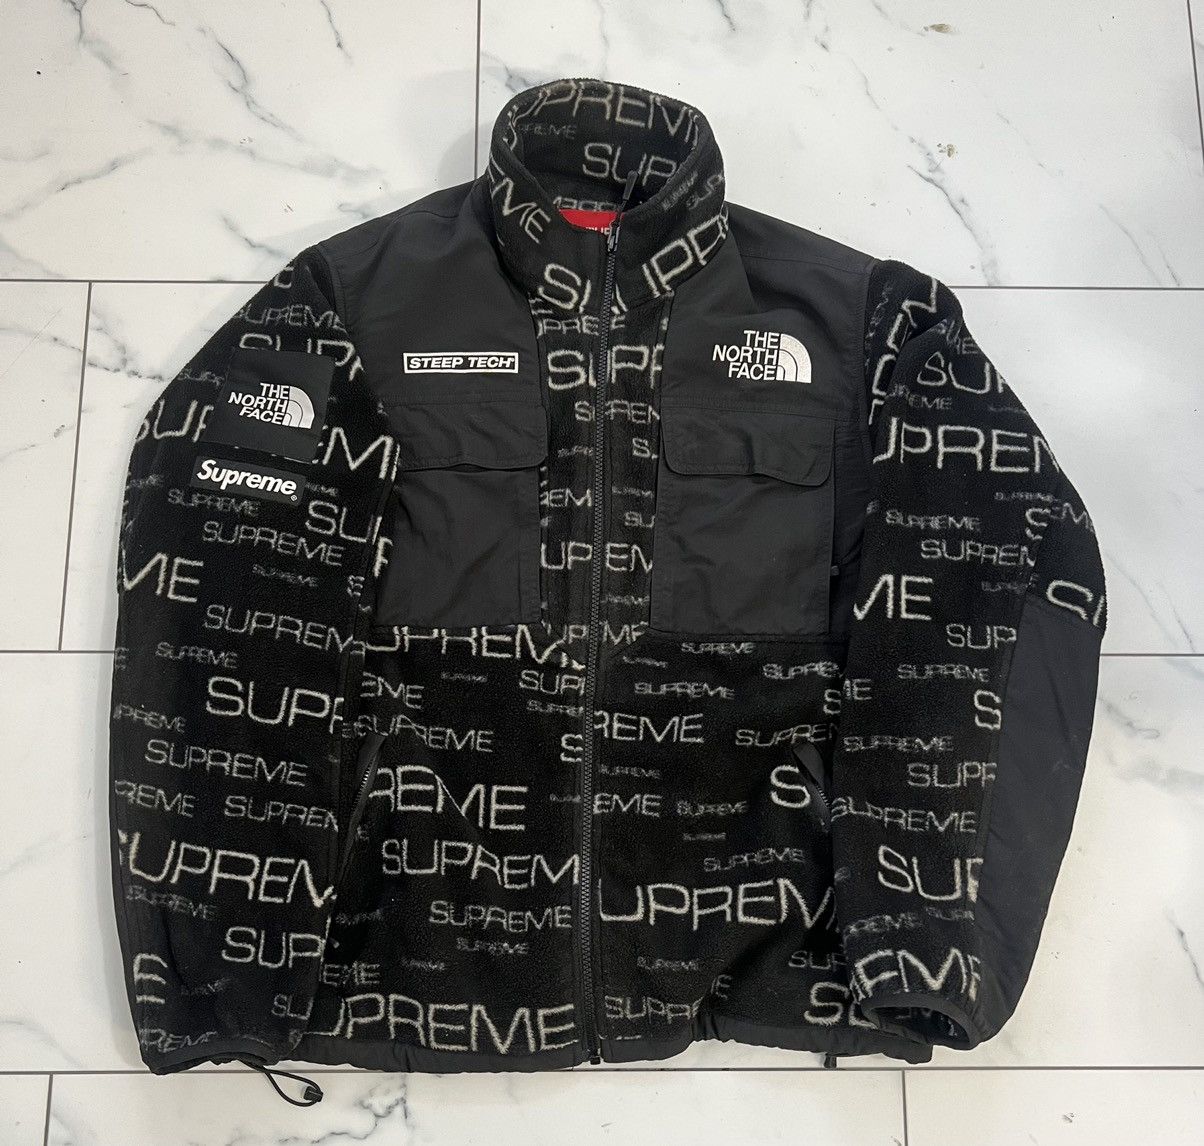 The North Face Steep Tech | Grailed